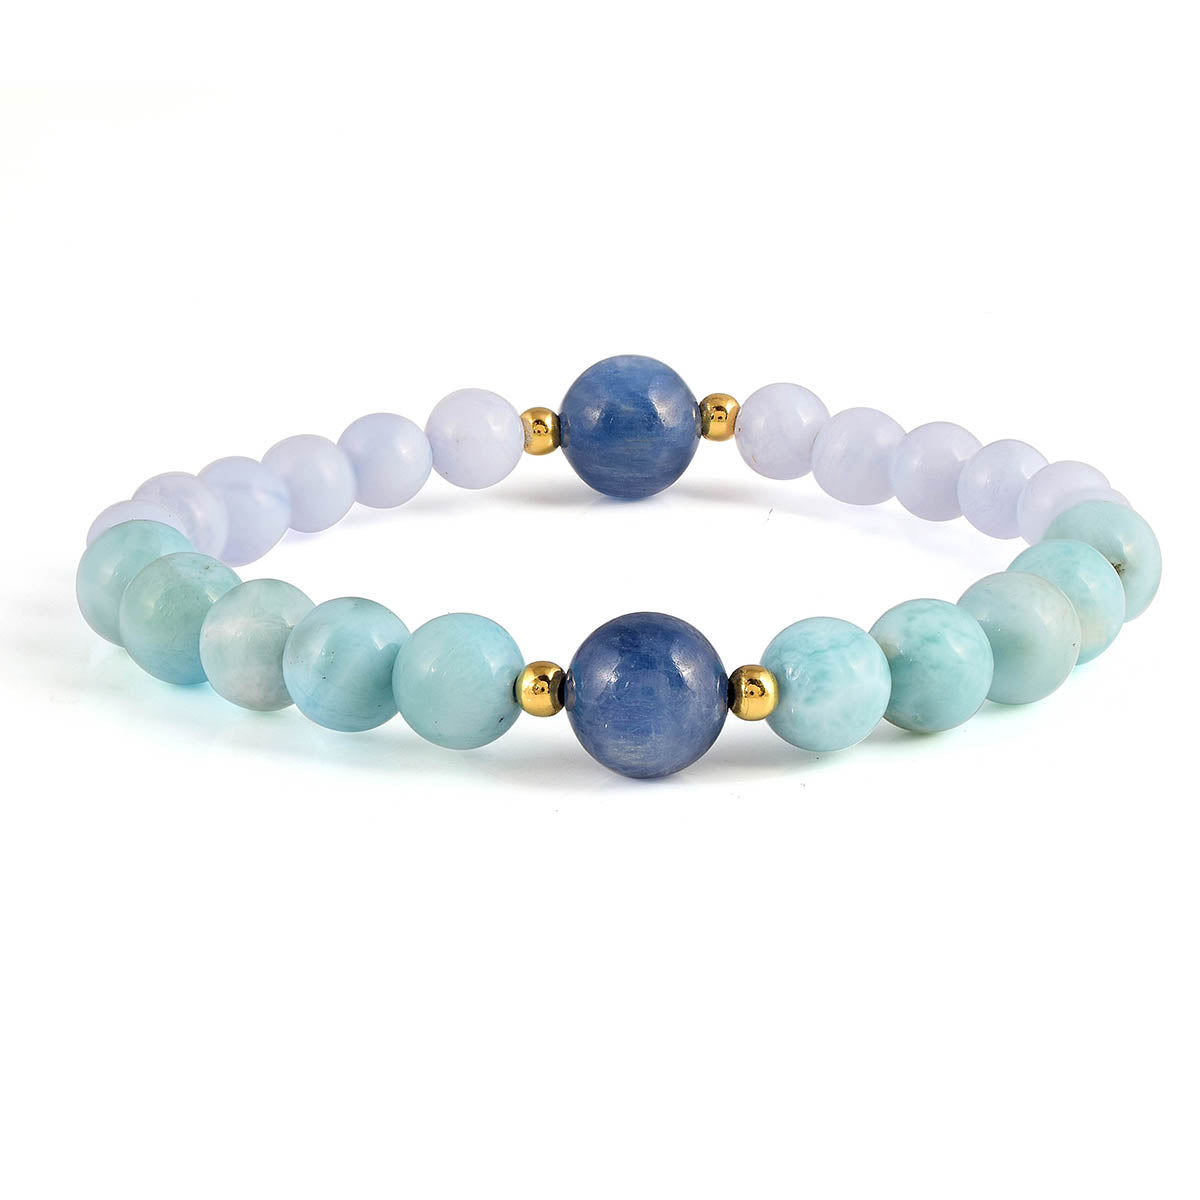 Blue Lace Agate Bracelet - the courage to express - The Rock Crystal Shop